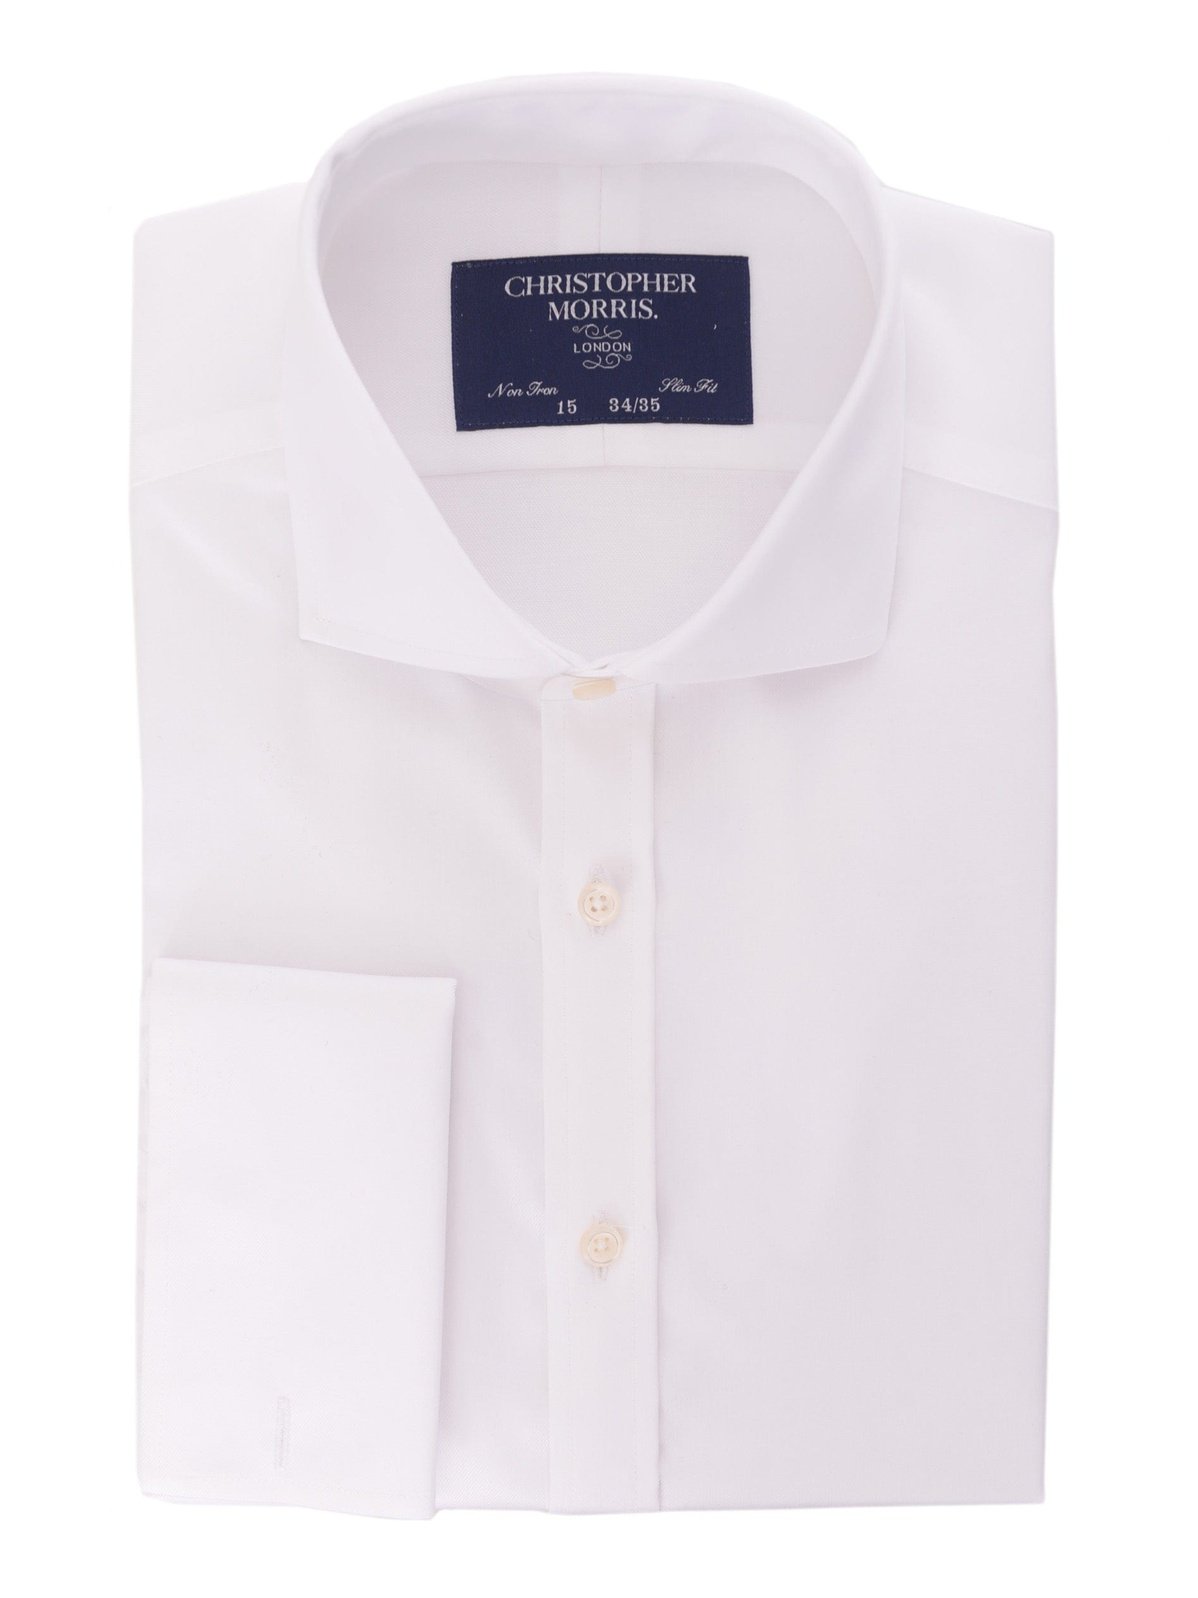 Christopher Morris Bestselling Items Christopher Morris Men&#39;s 100% Cotton Non-Iron White Slim Fit French Cuff Dress Shirt